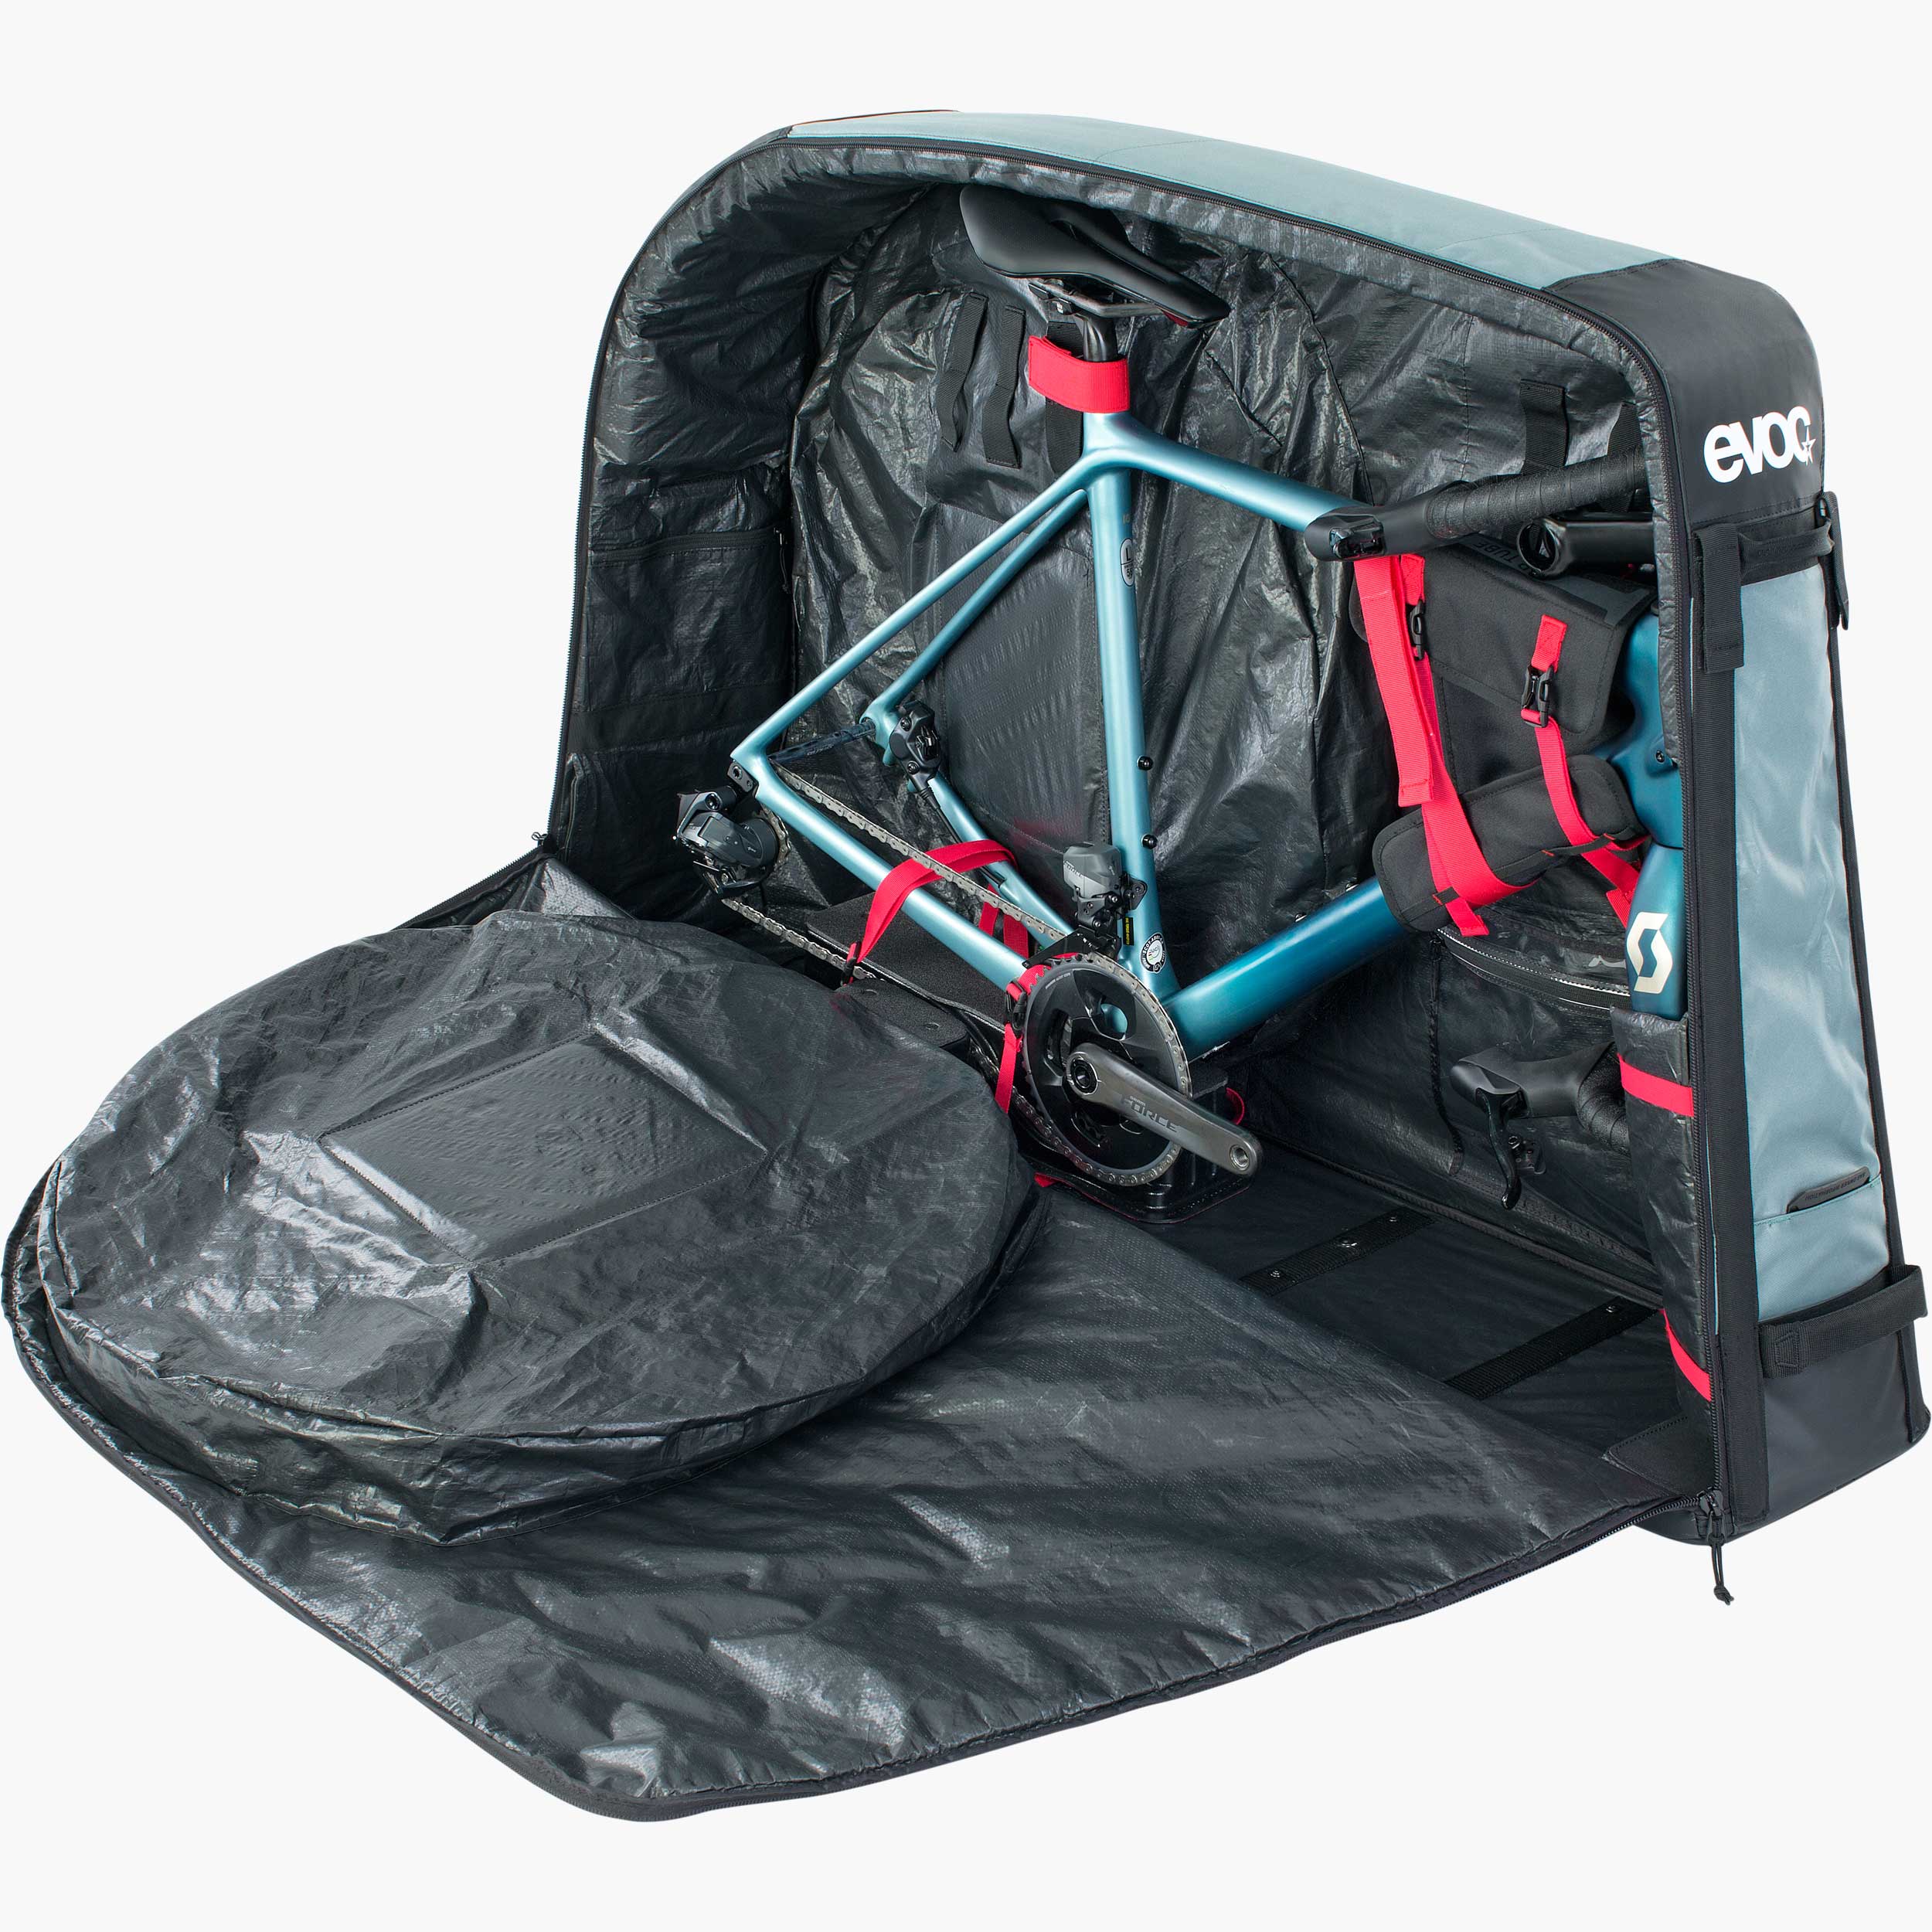 Weather-Resistant Top Tube Bag-Cycling Essentials Storage - Snēk Cycling